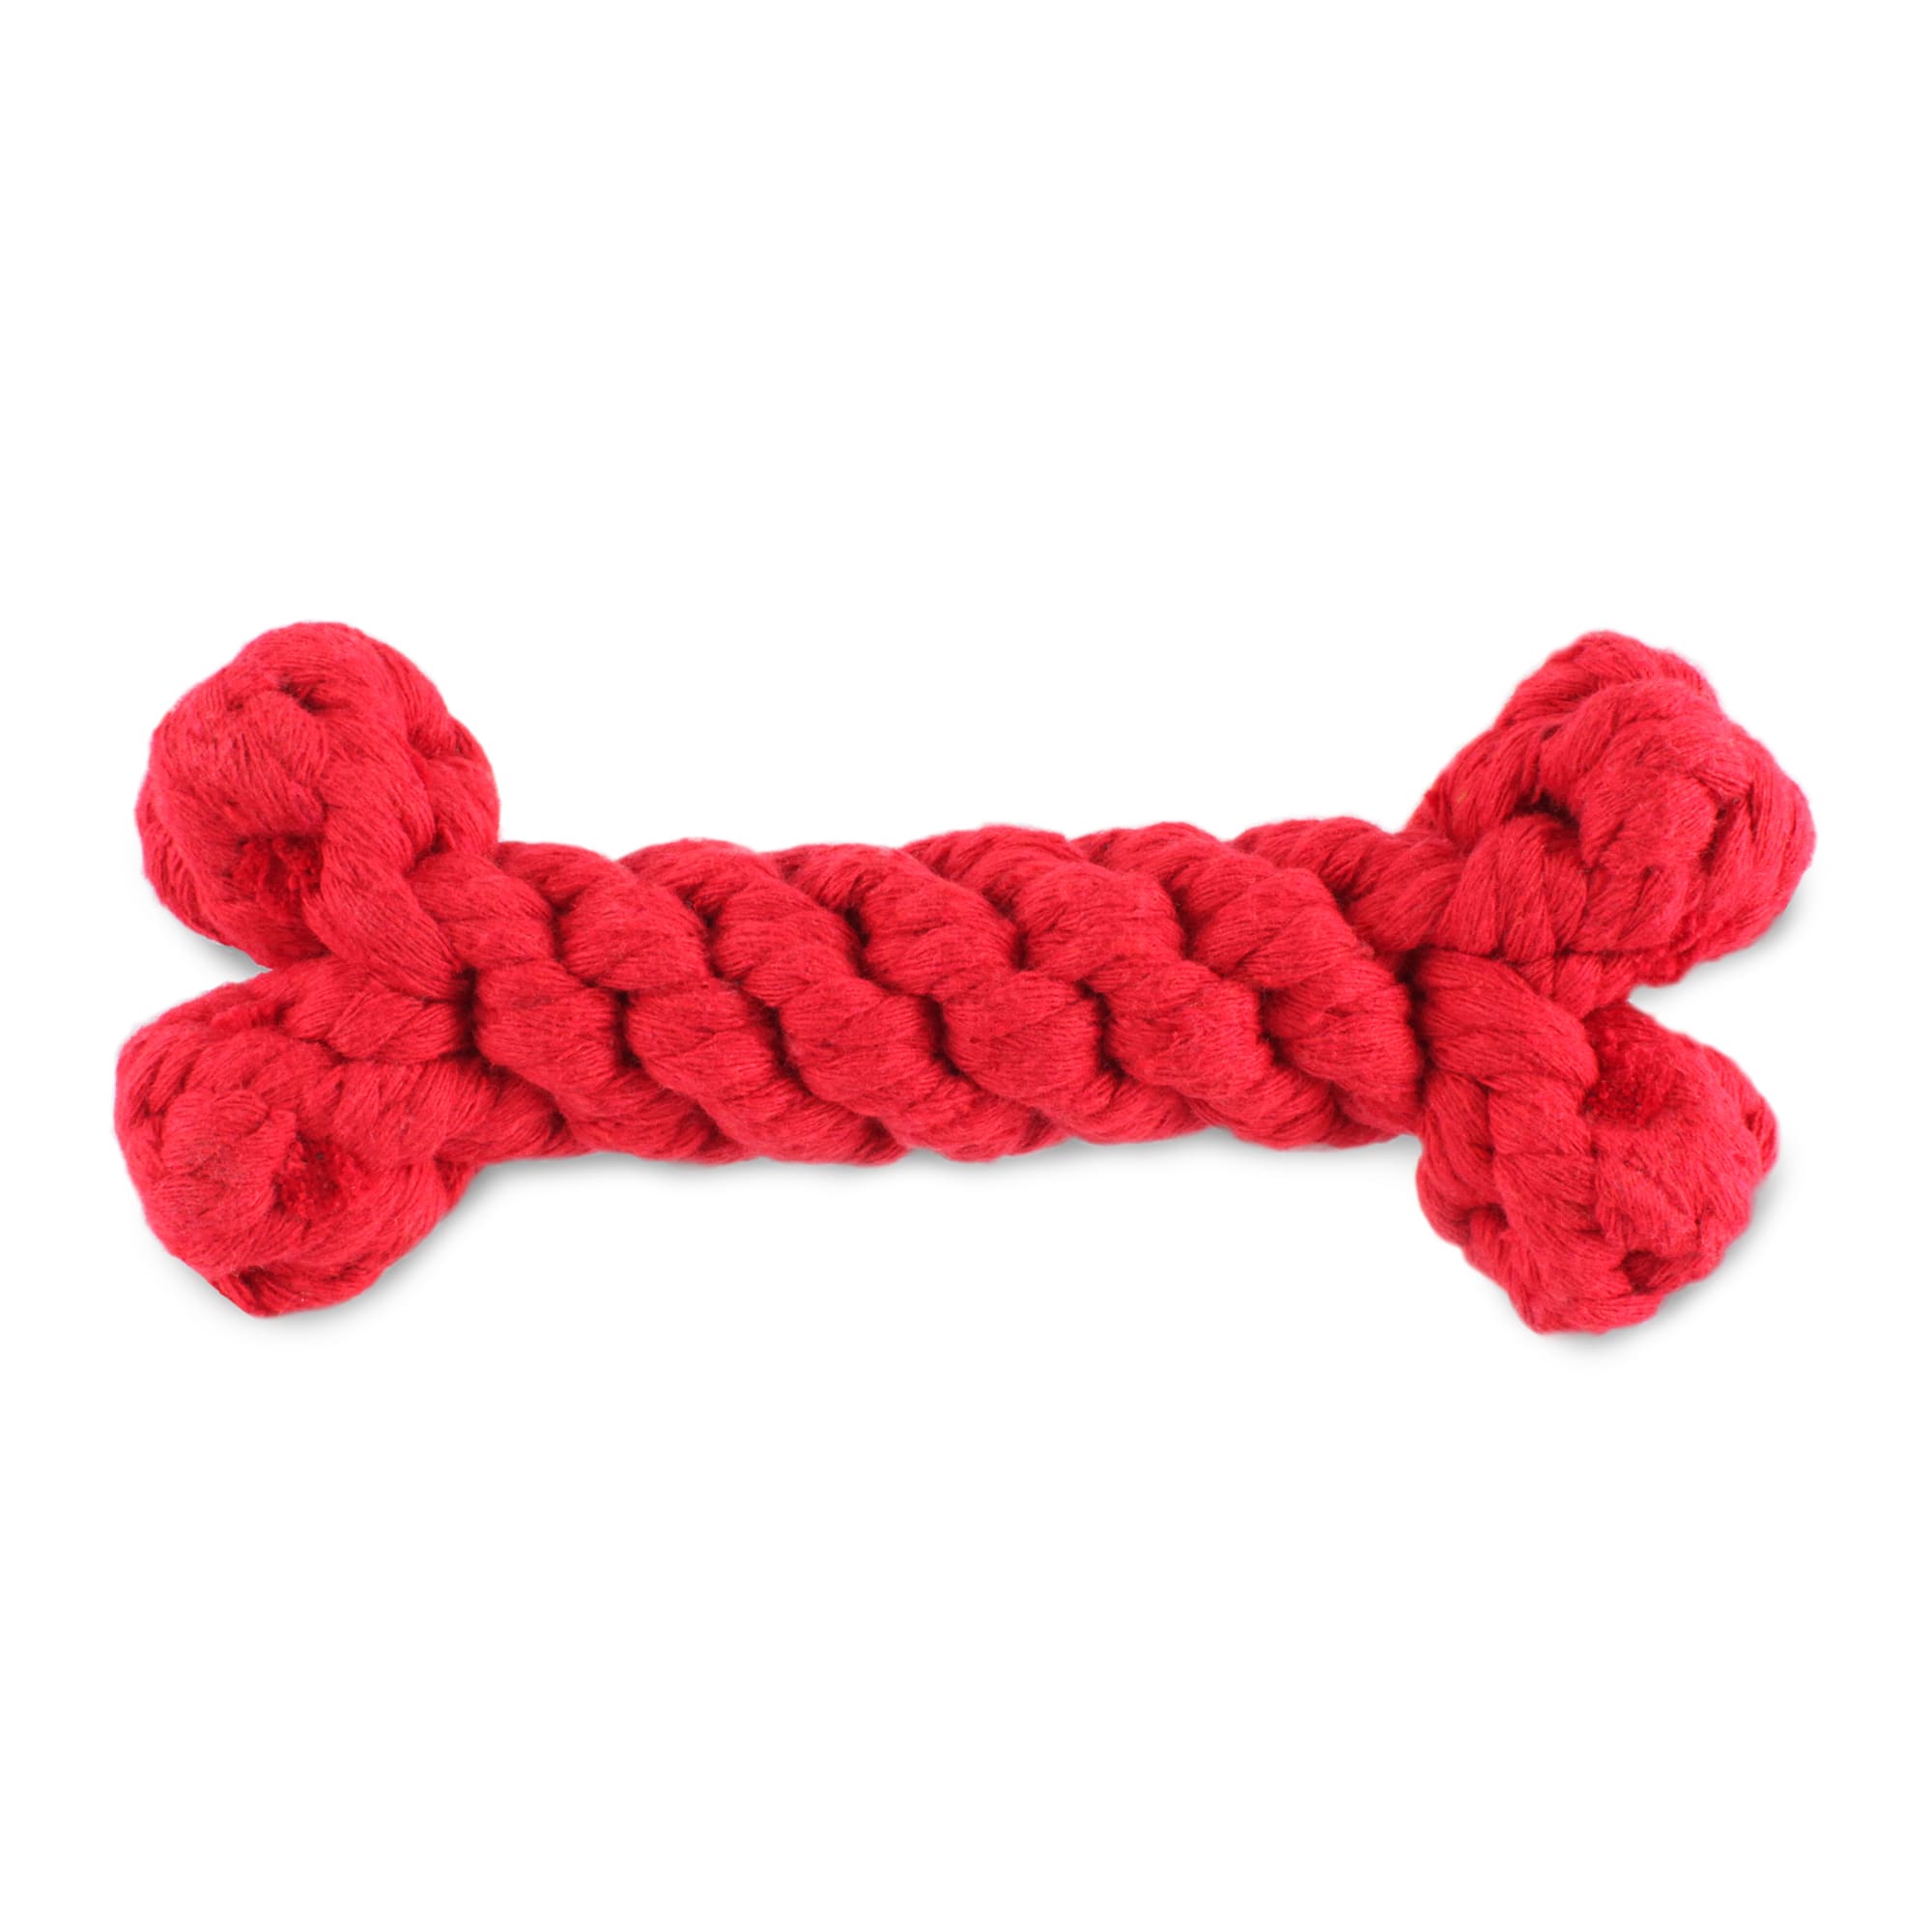 harry-barker-red-rope-bone-dog-toy-small-petco